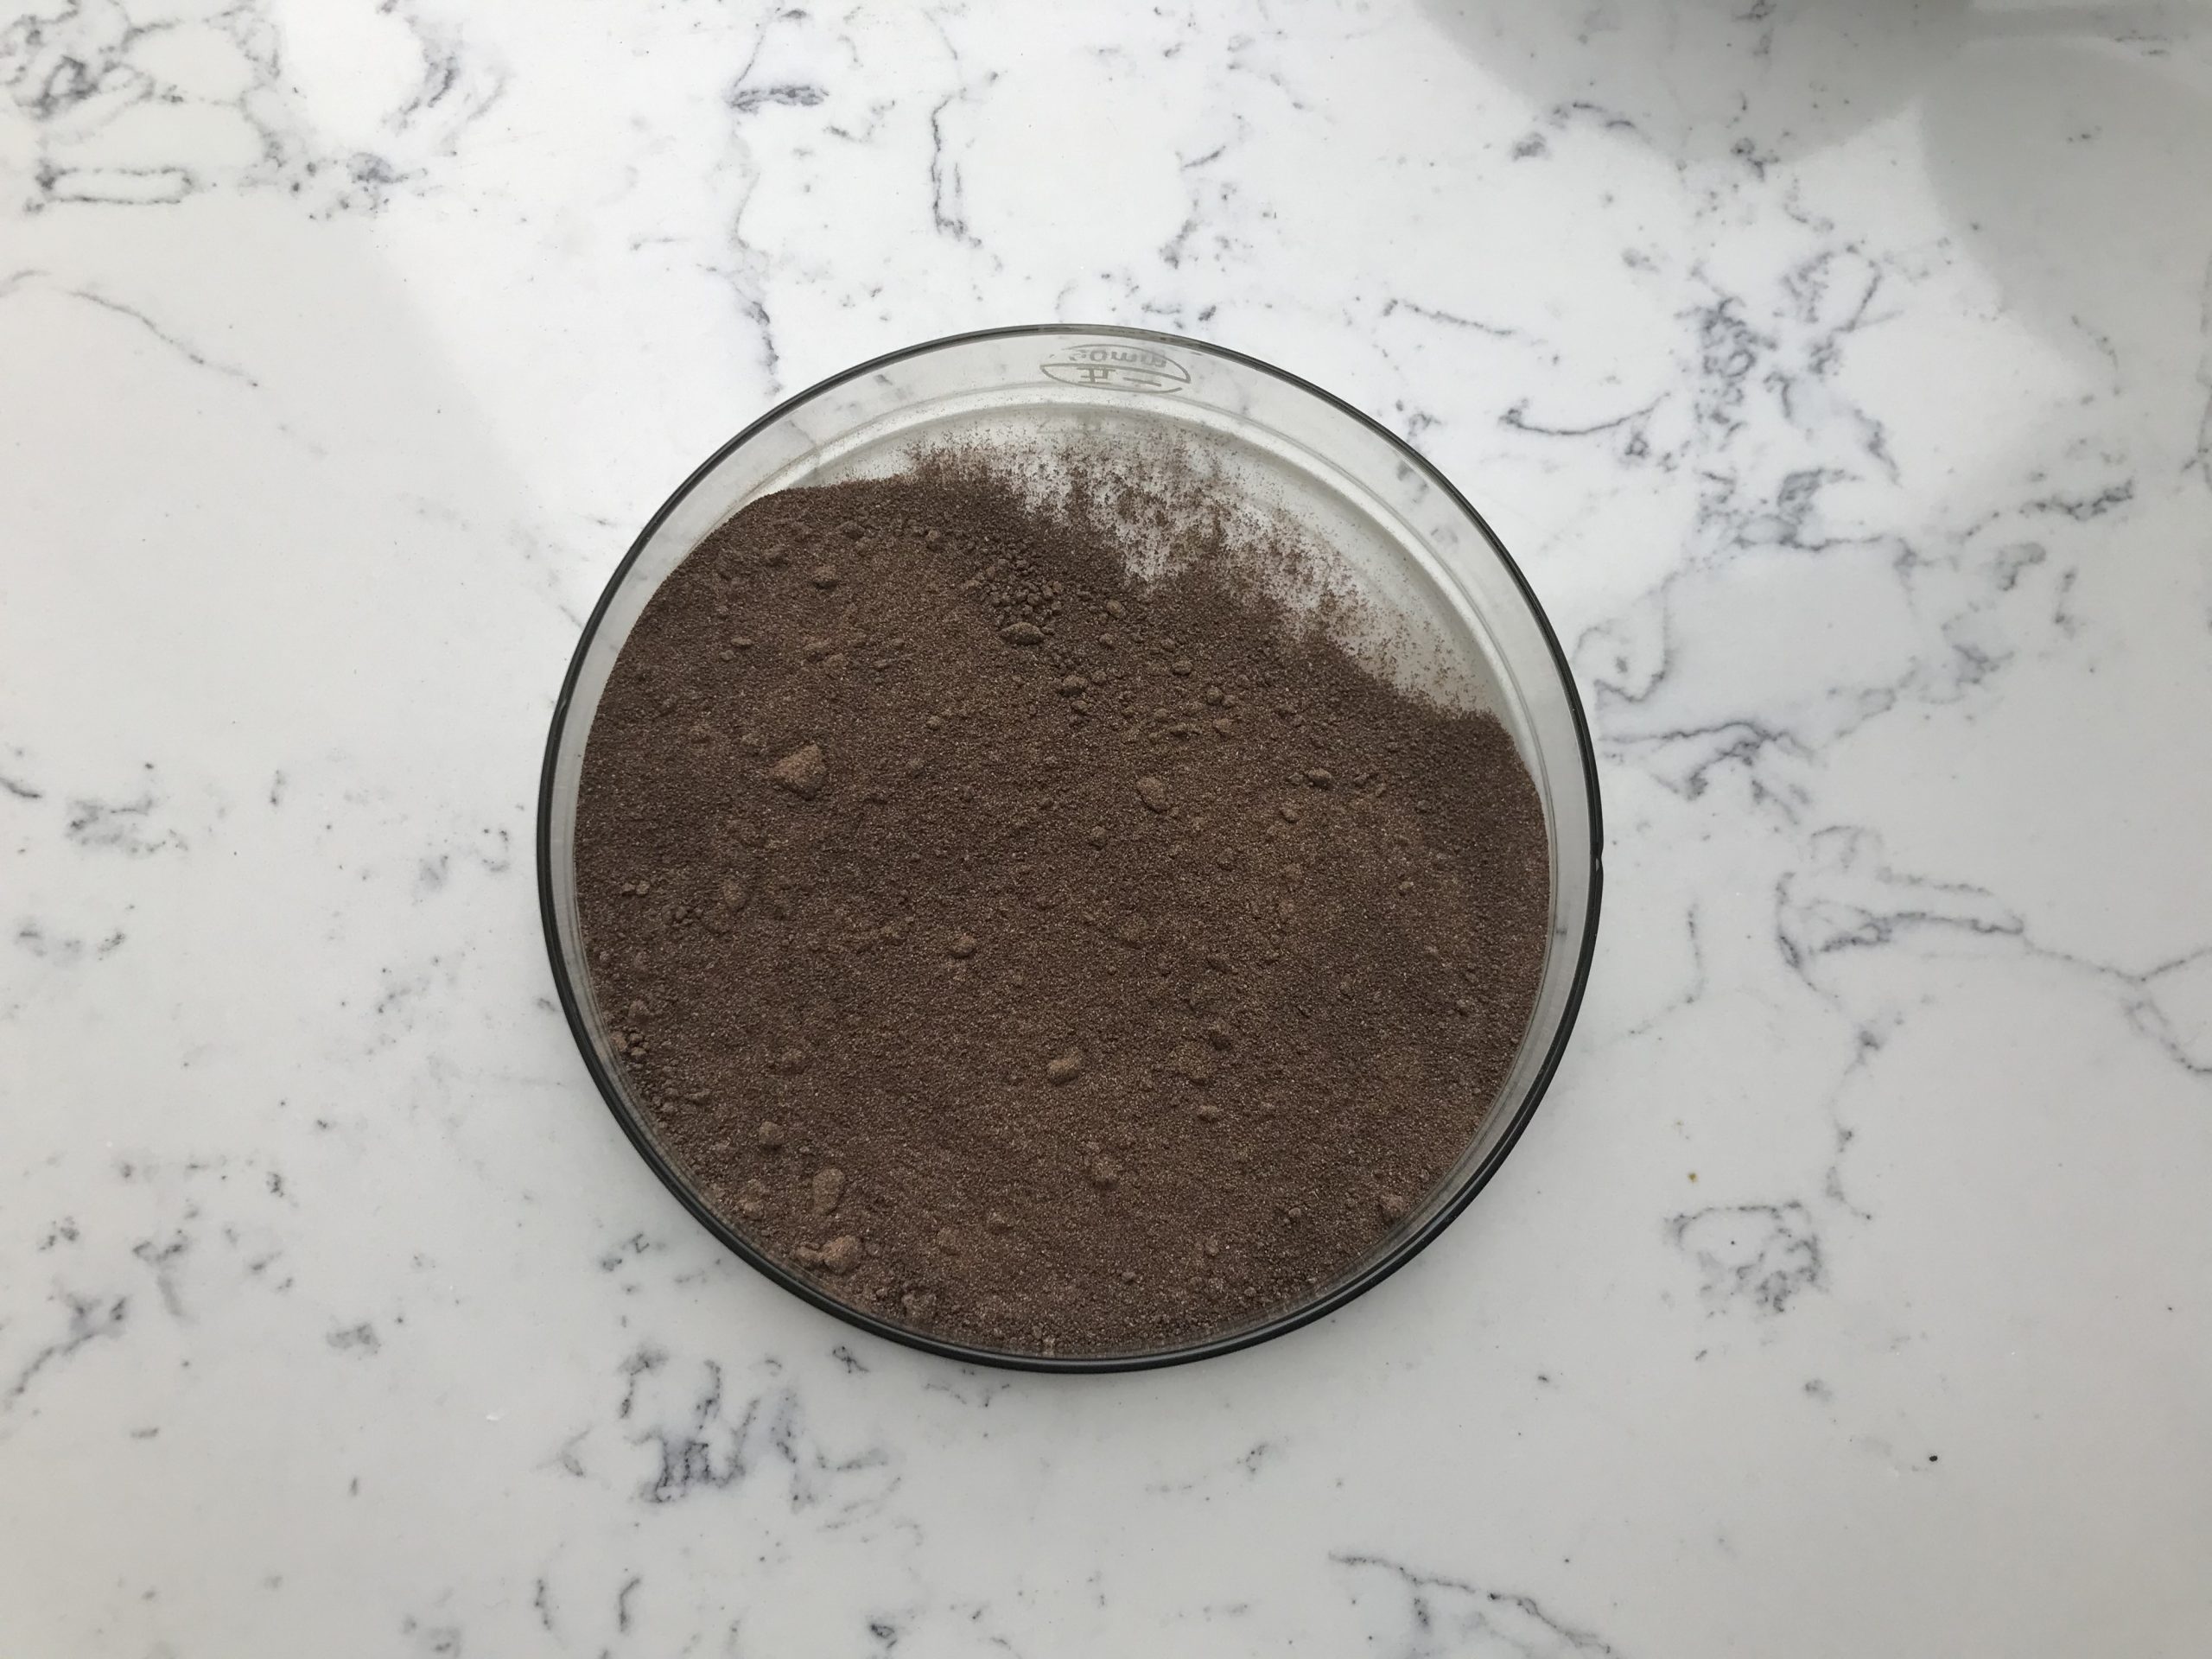 Chemical structure and physical properties of Propolis Powder-Xi'an Lyphar Biotech Co., Ltd